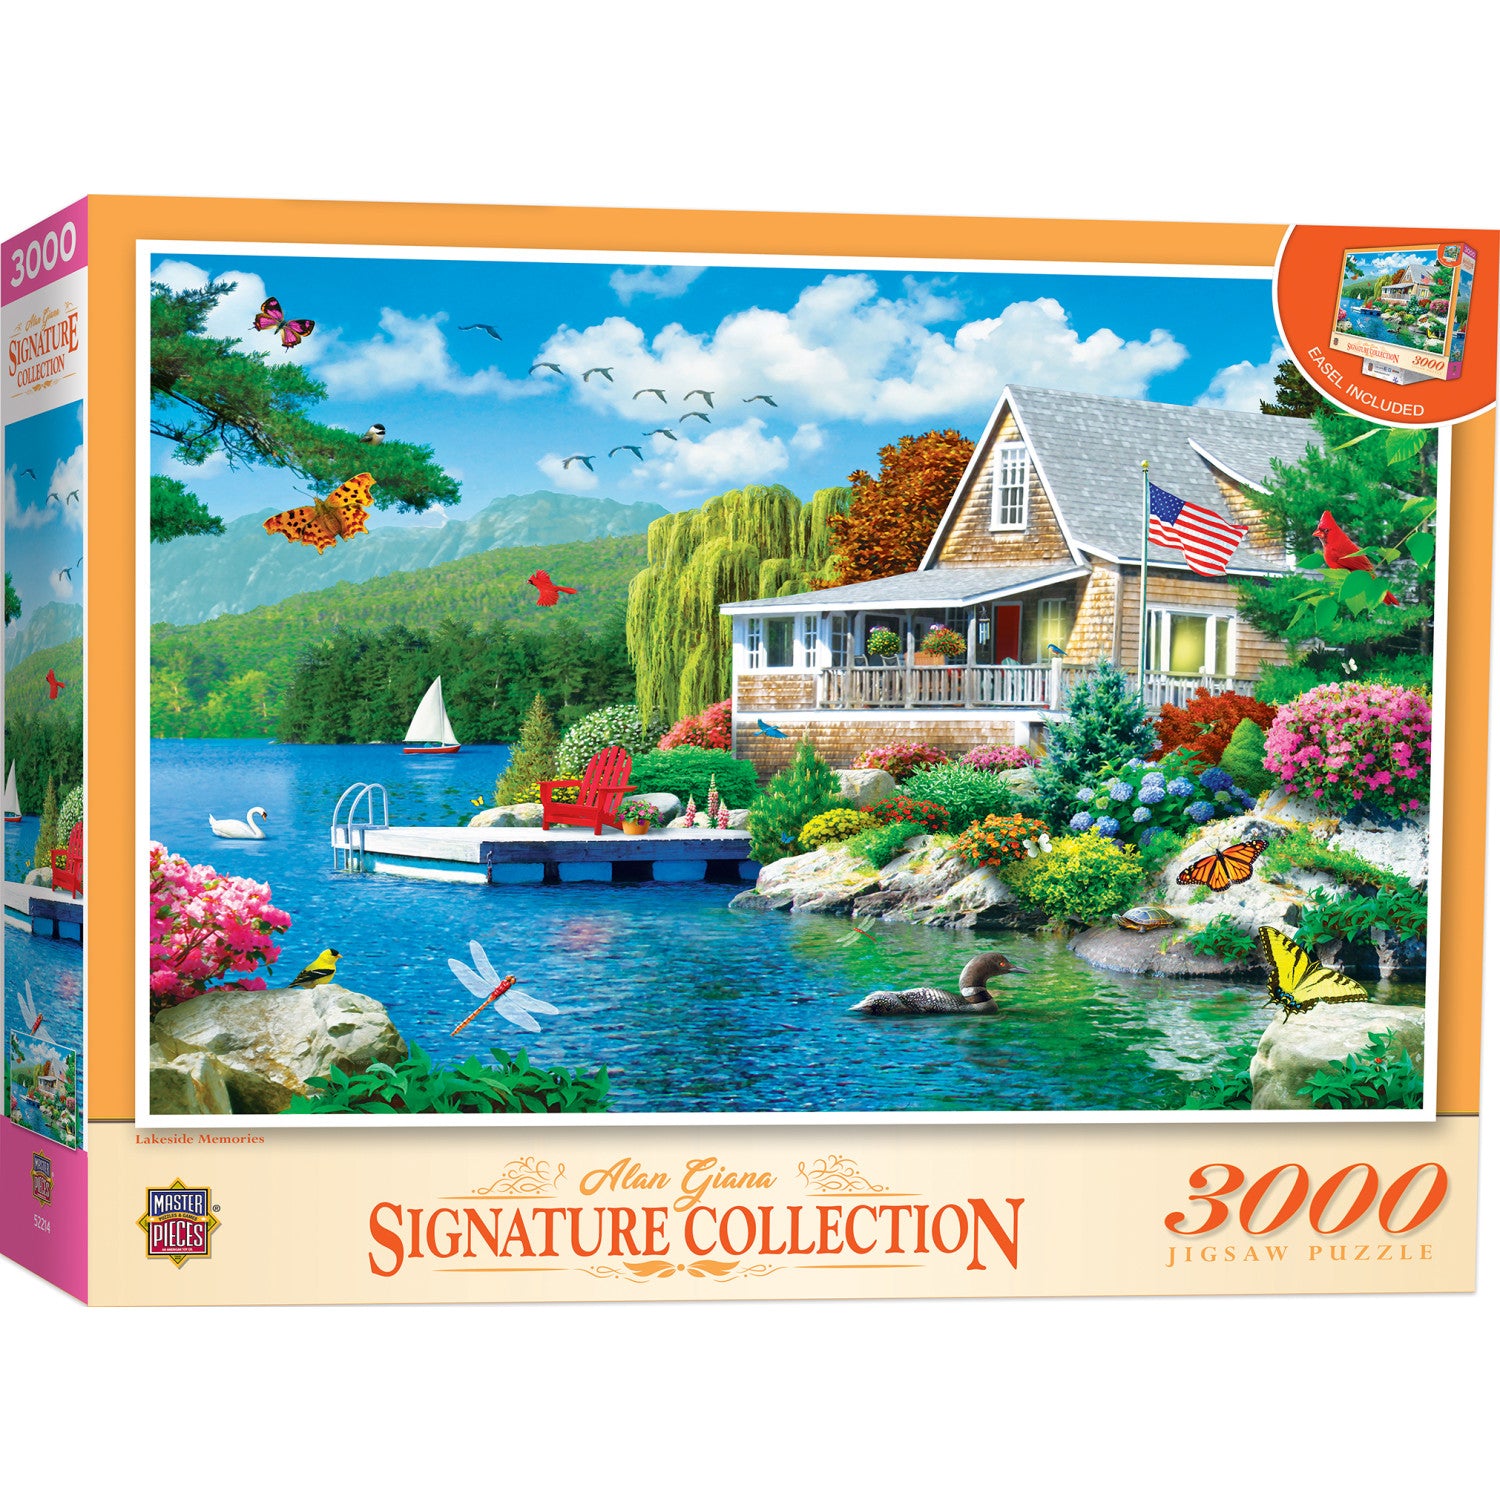 Signature Collection - Lakeside Memories 3000 Piece Jigsaw Puzzle